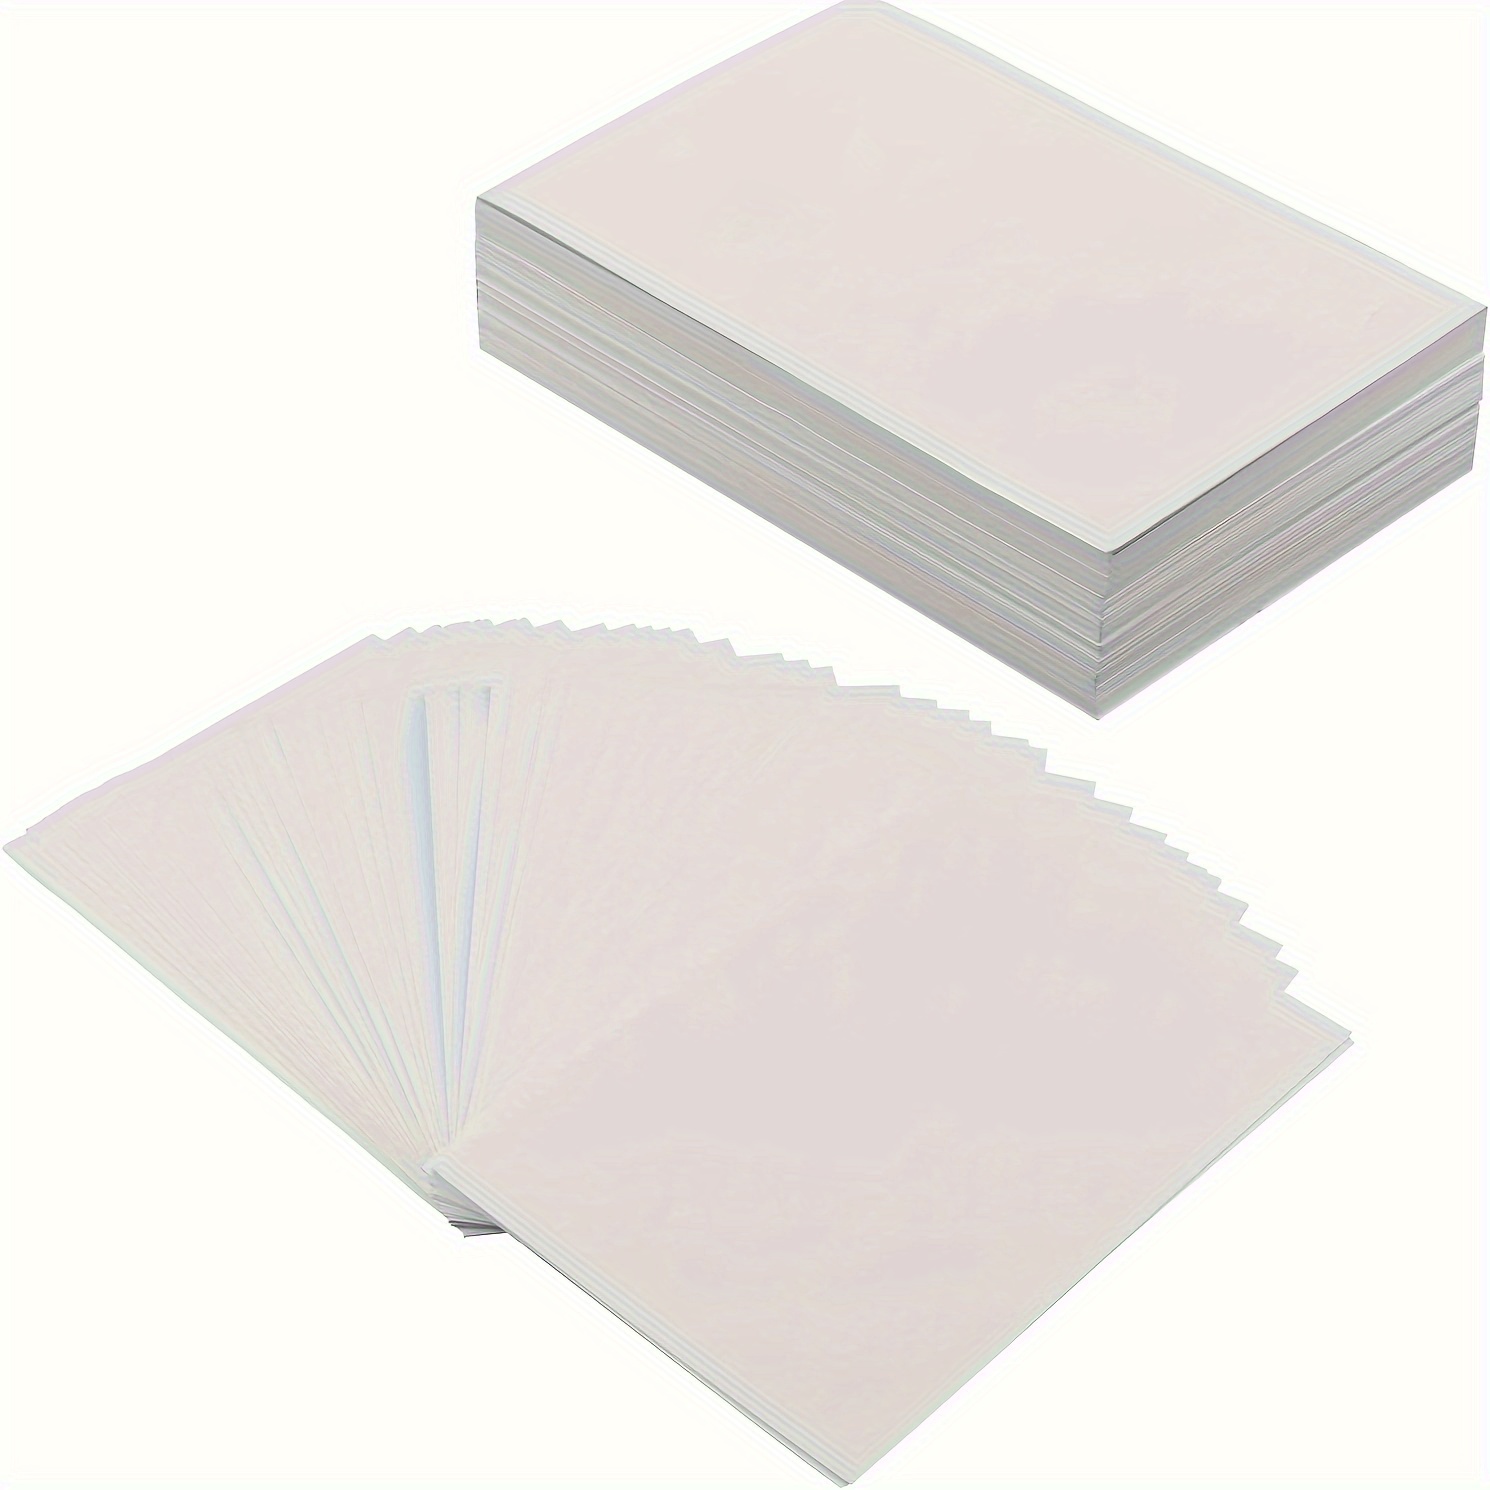 

Value Pack 50pcs White Blank Cardstock, 4x6in Thick Paper, 250gsm/90lb, Flat Printer Paper, Ideal For Invitations, Postcards, Photo Prints, Diy Card Making